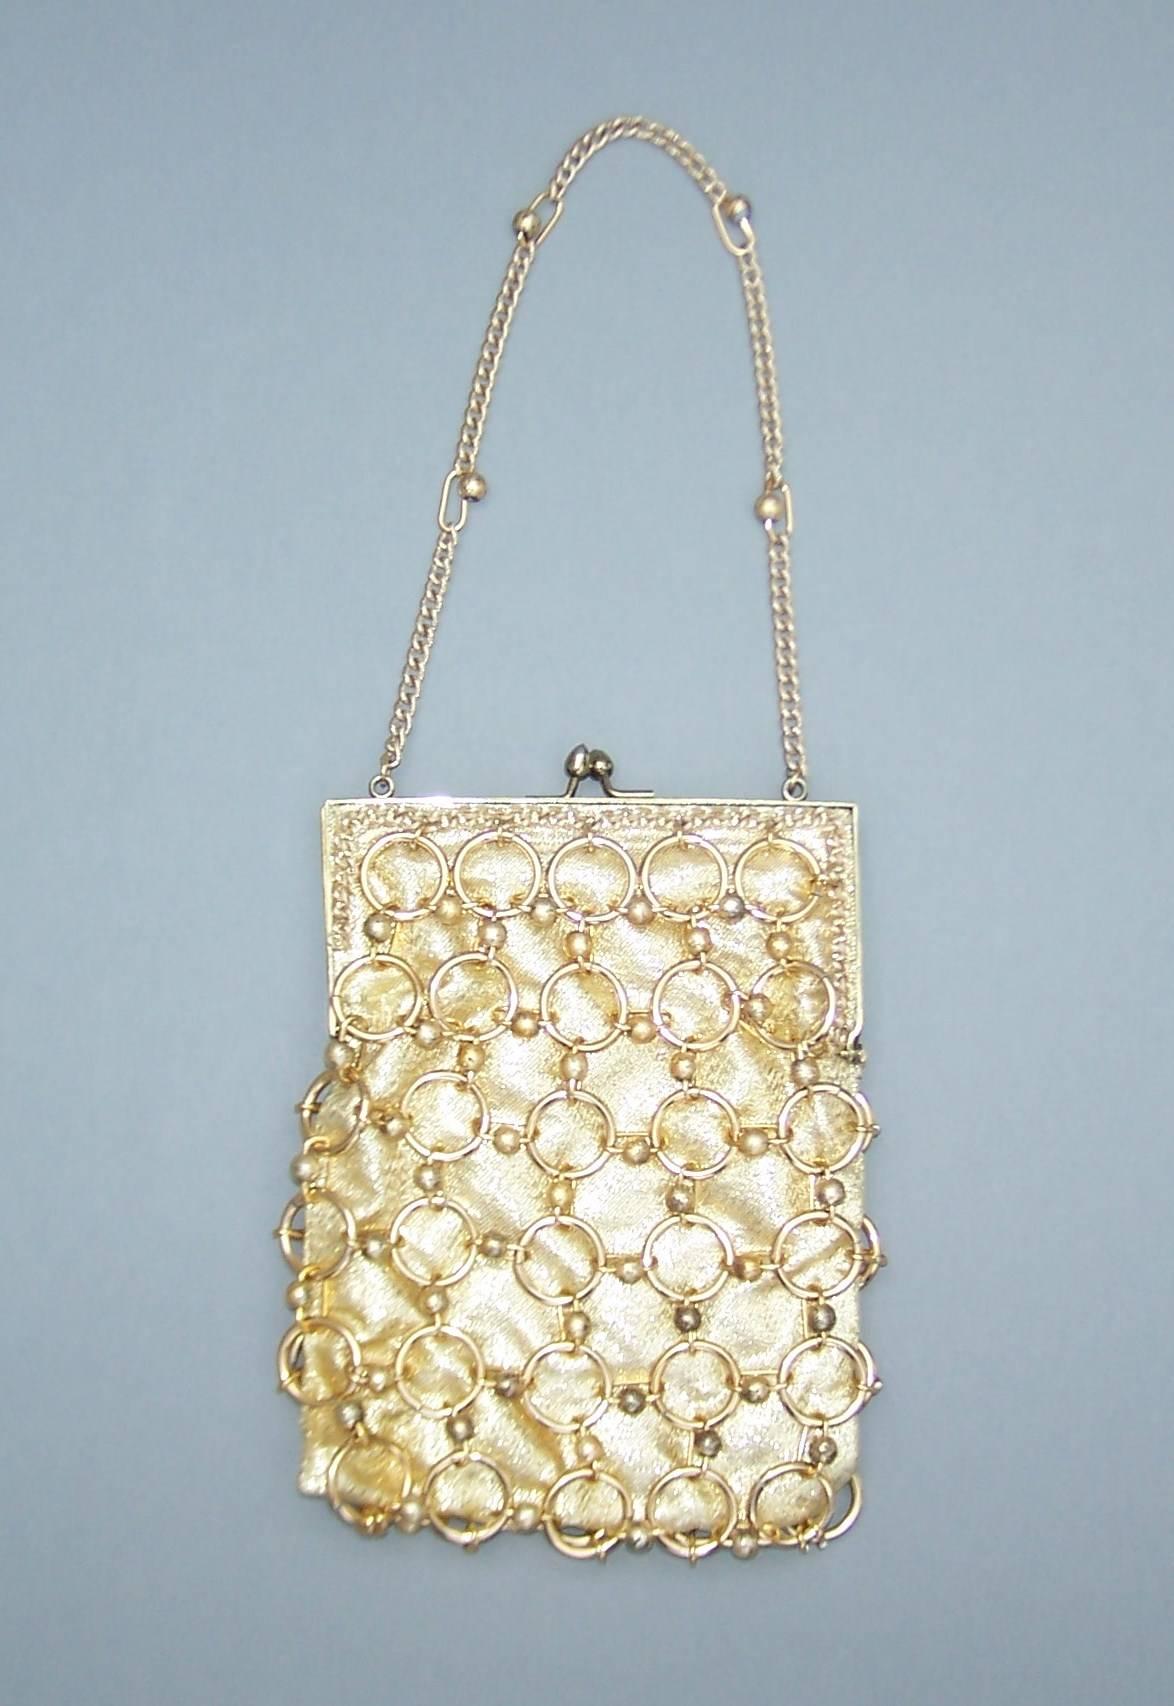 This 1960's Walborg chain mail design emulates the Paco Rabanne space age handbags from the same period.  The handbag is constructed of heavy weight gold lame fabric with a braided metal frame and a jewelry style beaded gold link overlay.  The kiss